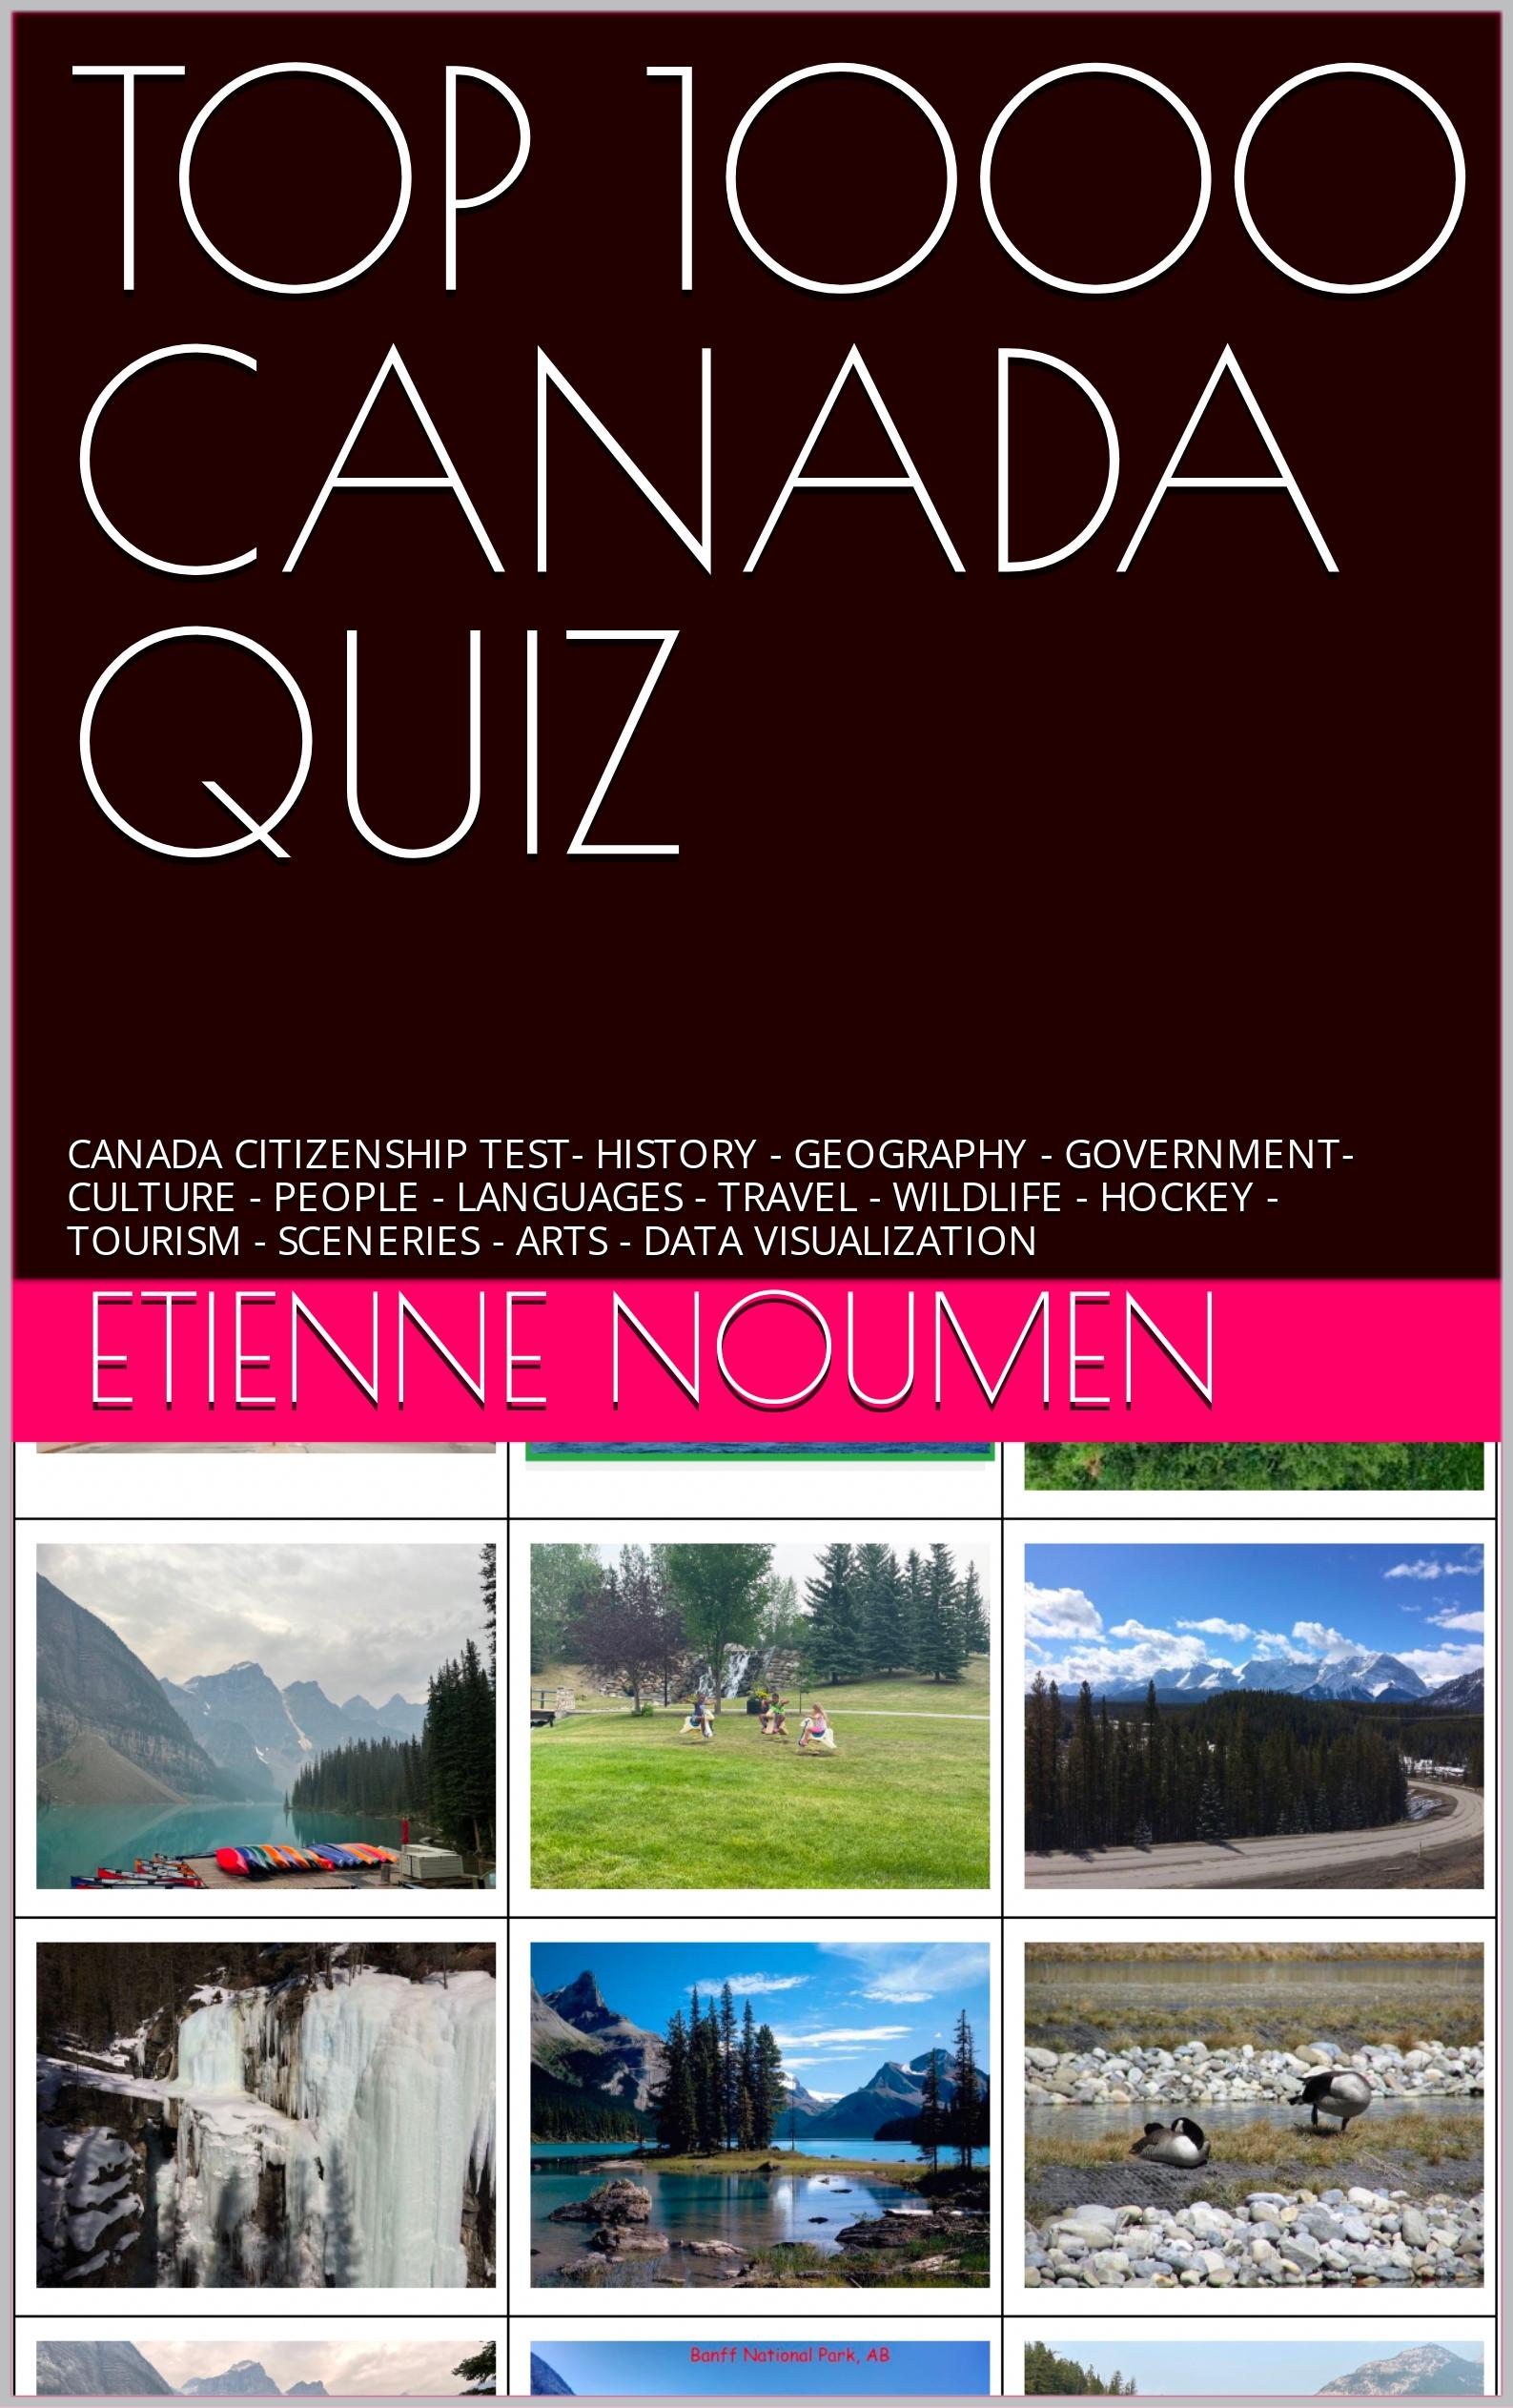 TOP 1000 CANADA QUIZ CANADA CITIZENSHIP TEST- HISTORY - GEOGRAPHY